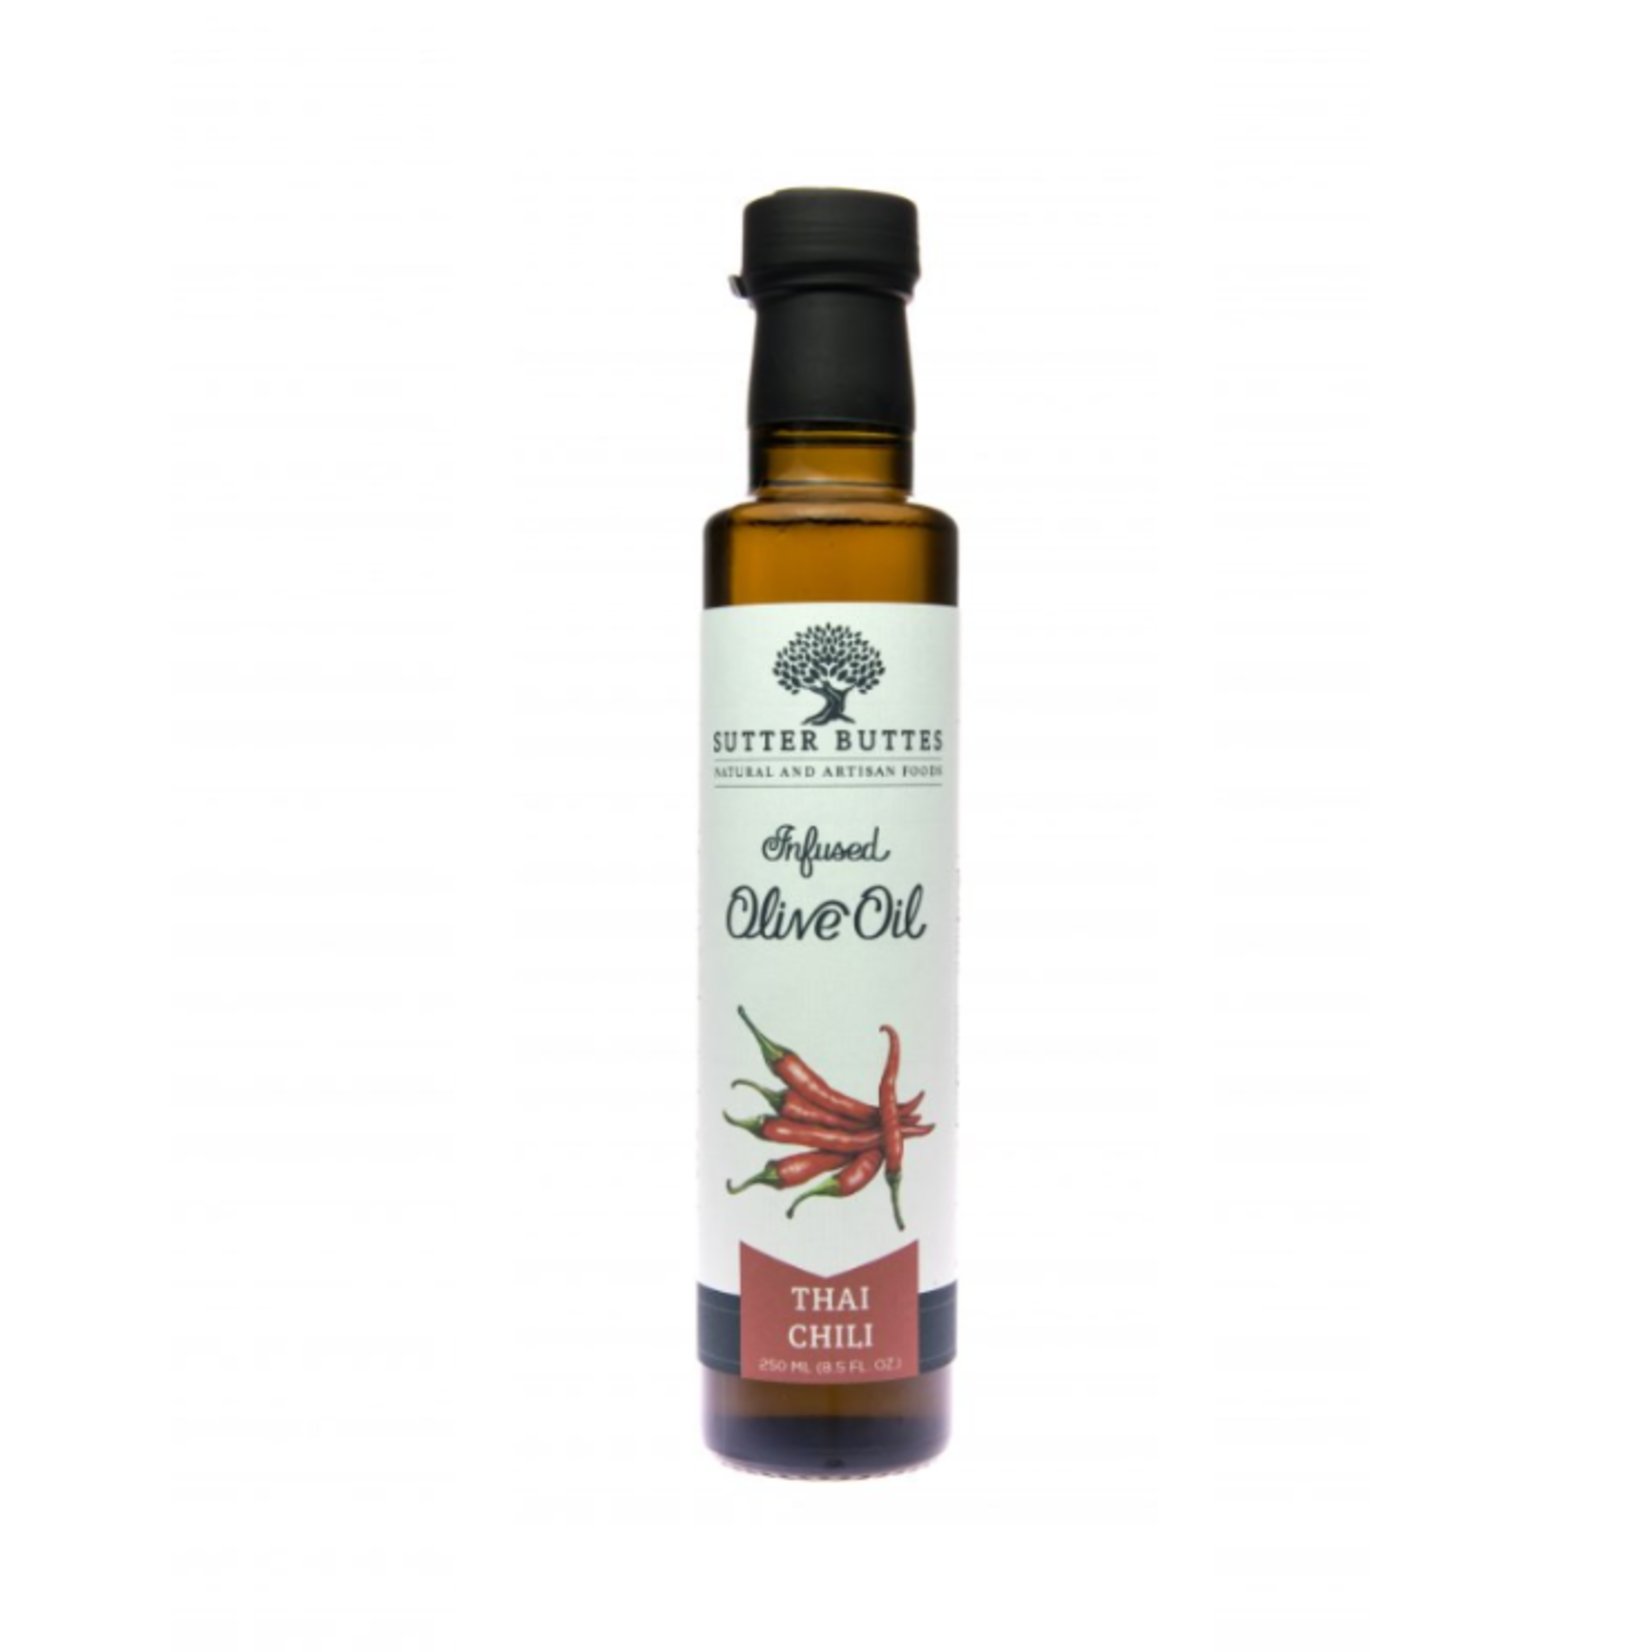 Sutter Buttes Thai Chili Infused Olive Oil, 250 ml